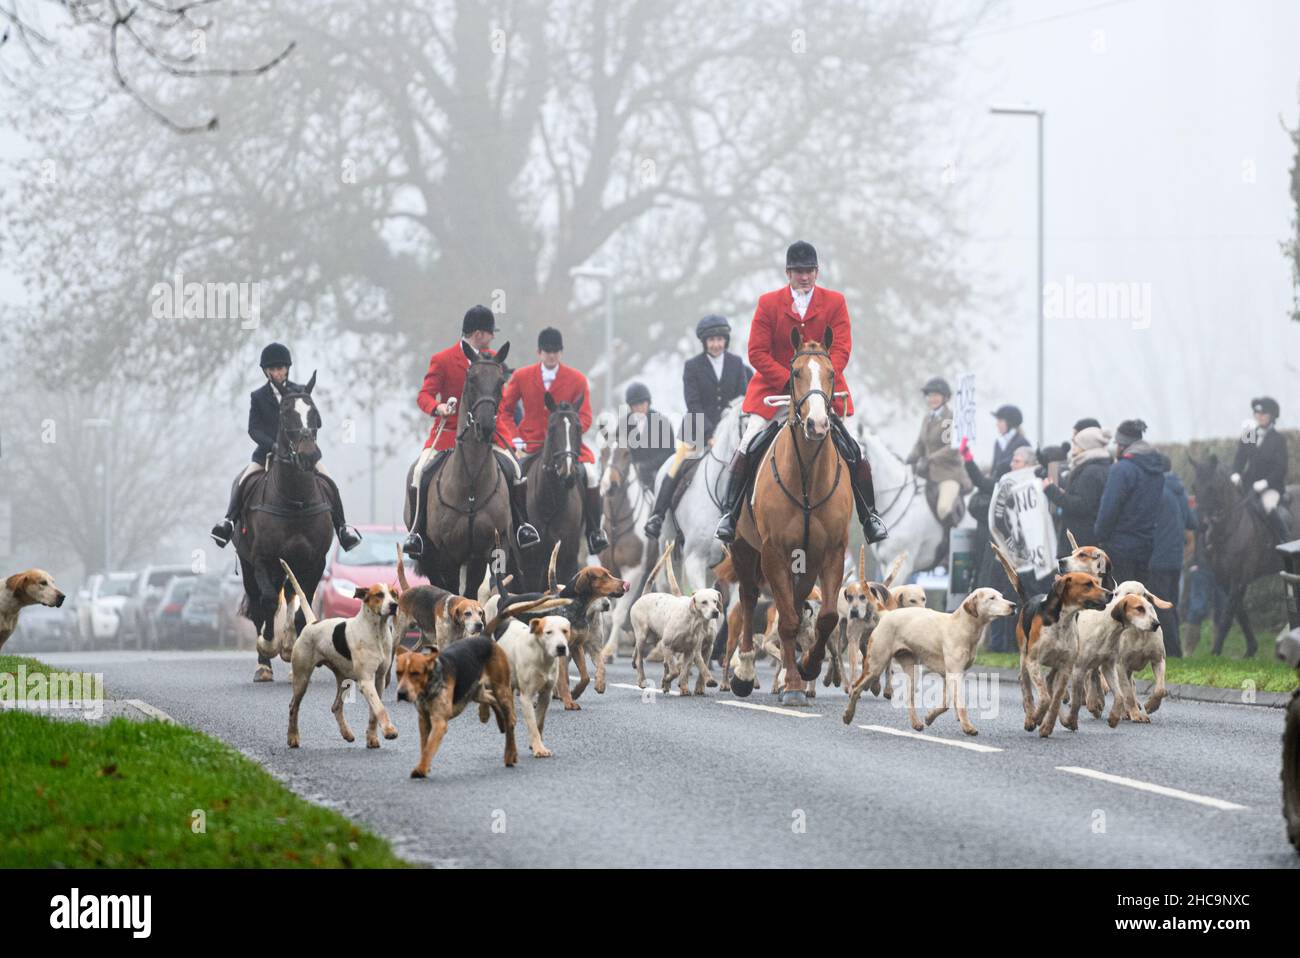 Huntsman Chris Edwards leads The Cottesmore Hunt Boxing Day Meet at Barleythorpe, Sunday 26 December 2021 © 2021 Nico Morgan. All Rights Reserved Stock Photo